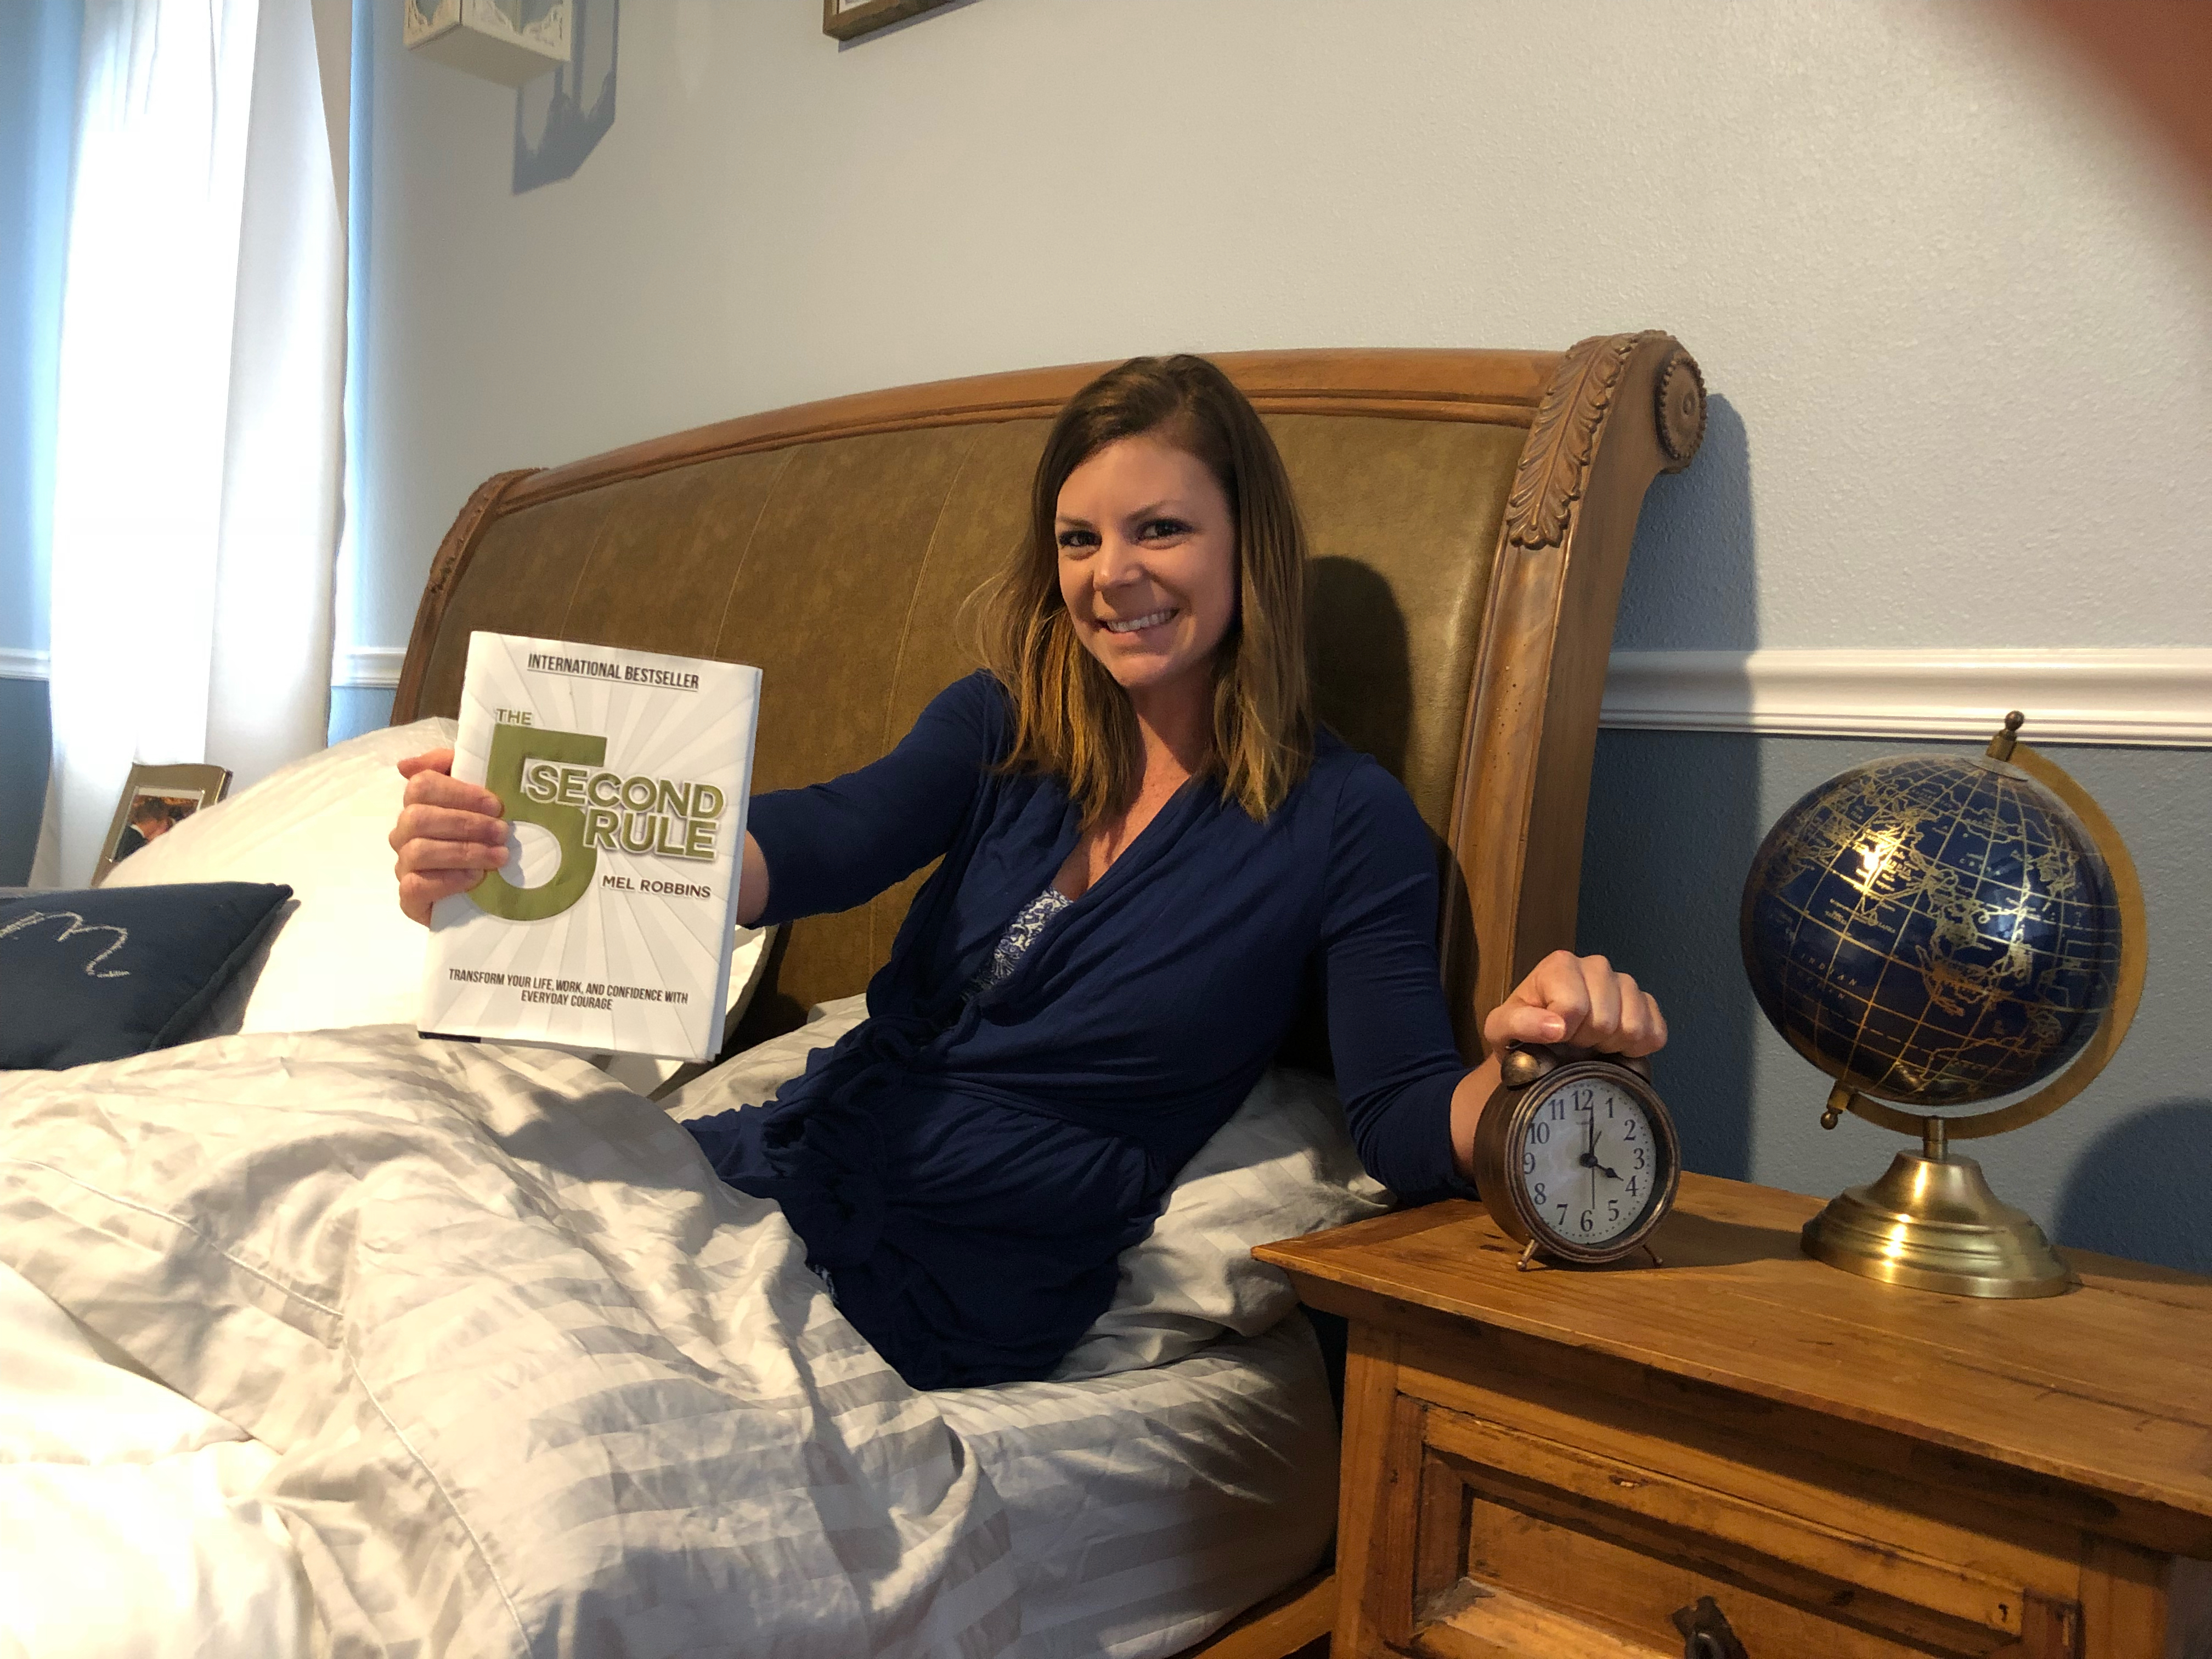 changed life 5 seconds – Erica holding the 5-second rule book and her alarm clock, smiling